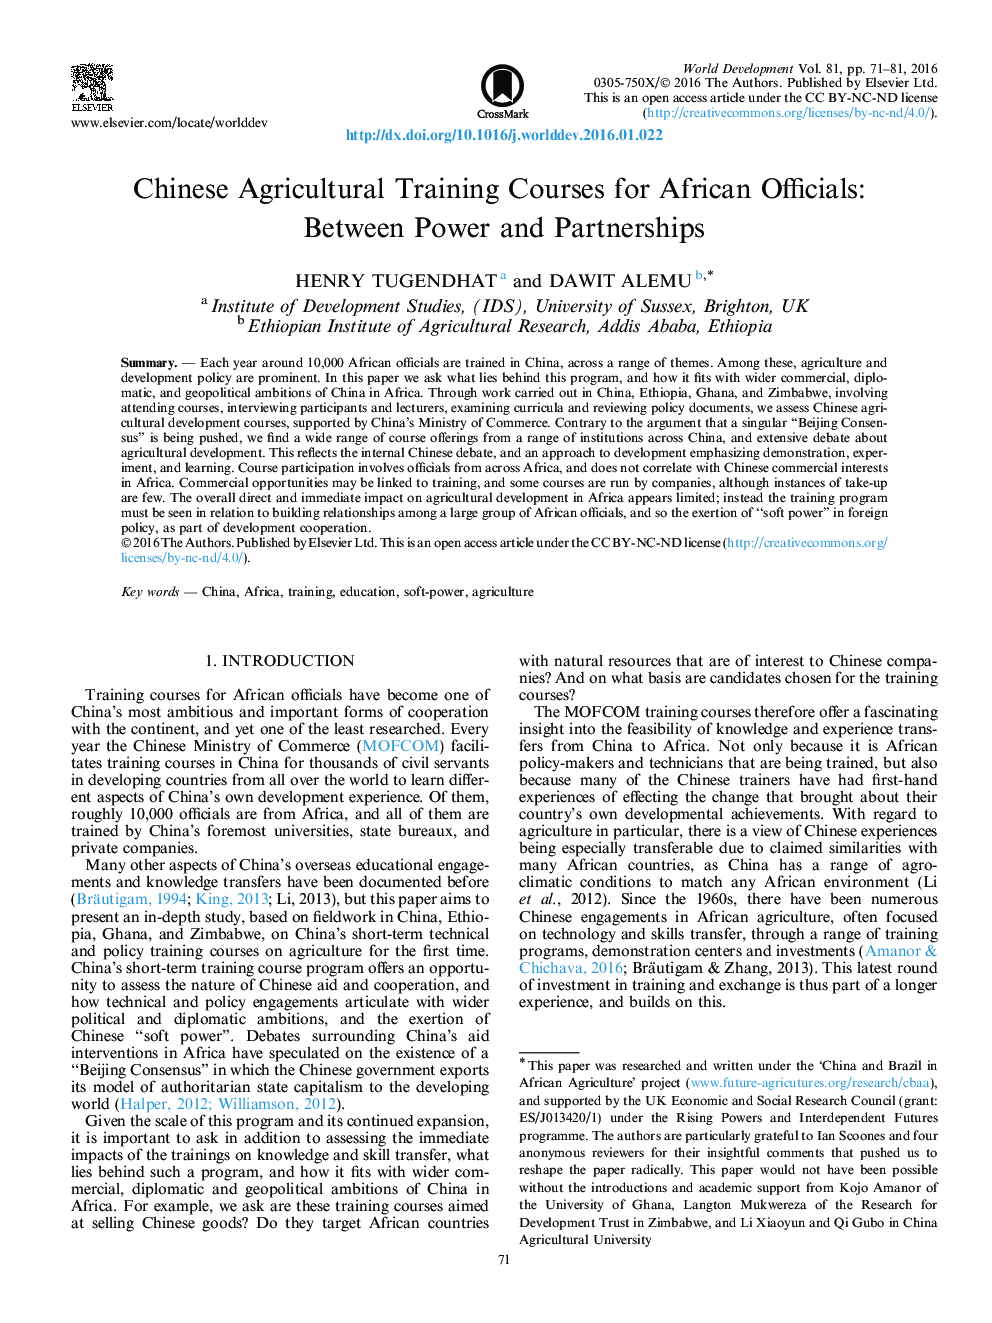 Chinese Agricultural Training Courses for African Officials: Between Power and Partnerships